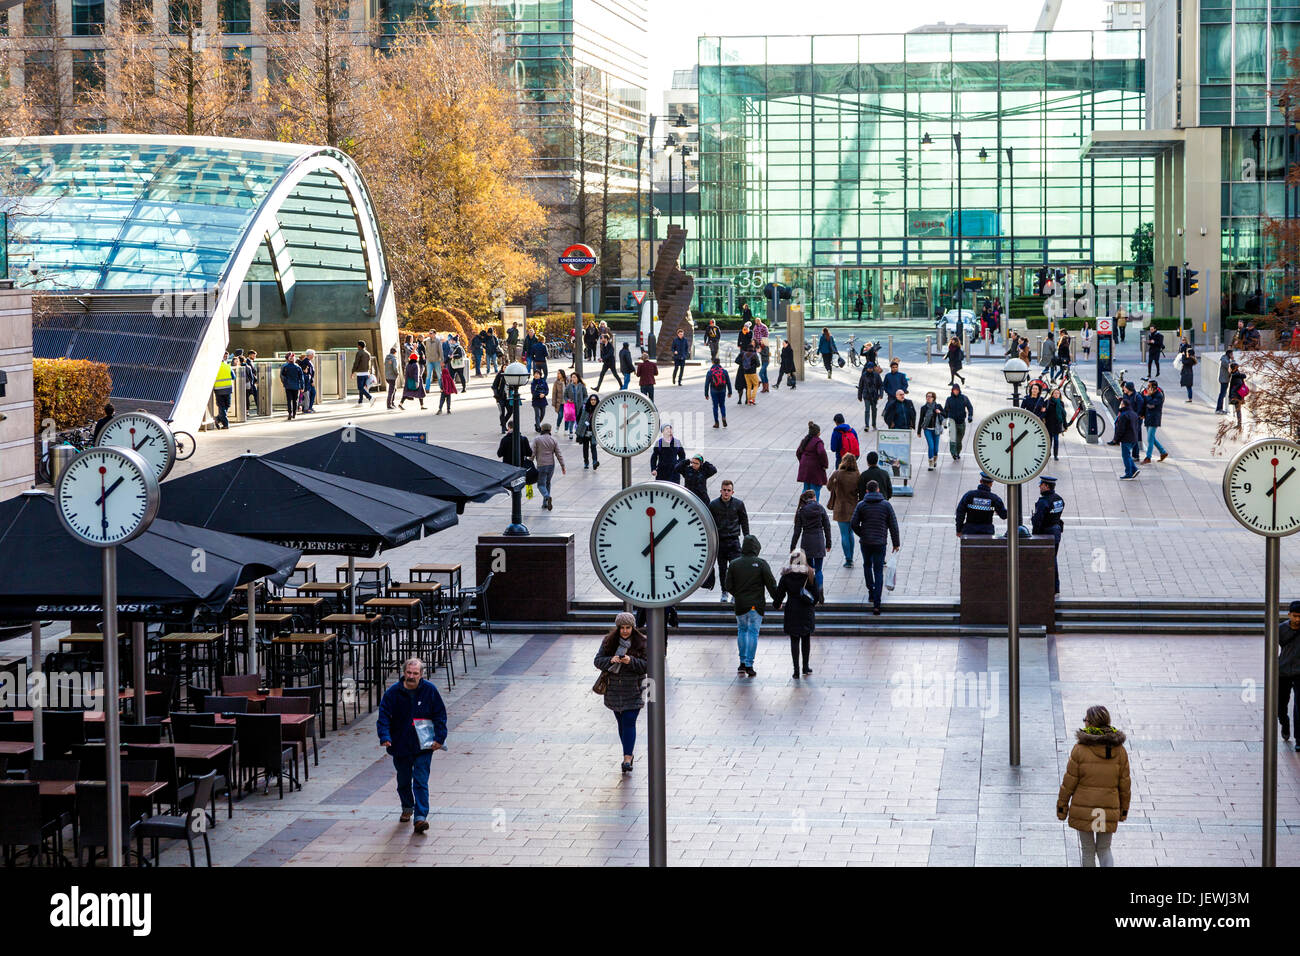 People walking in Reuters Plaza and Jubilee Plaza in Canary Wharf and public installation 'Six Public Clocks' by Konstantin Grcic, London, UK Stock Photo